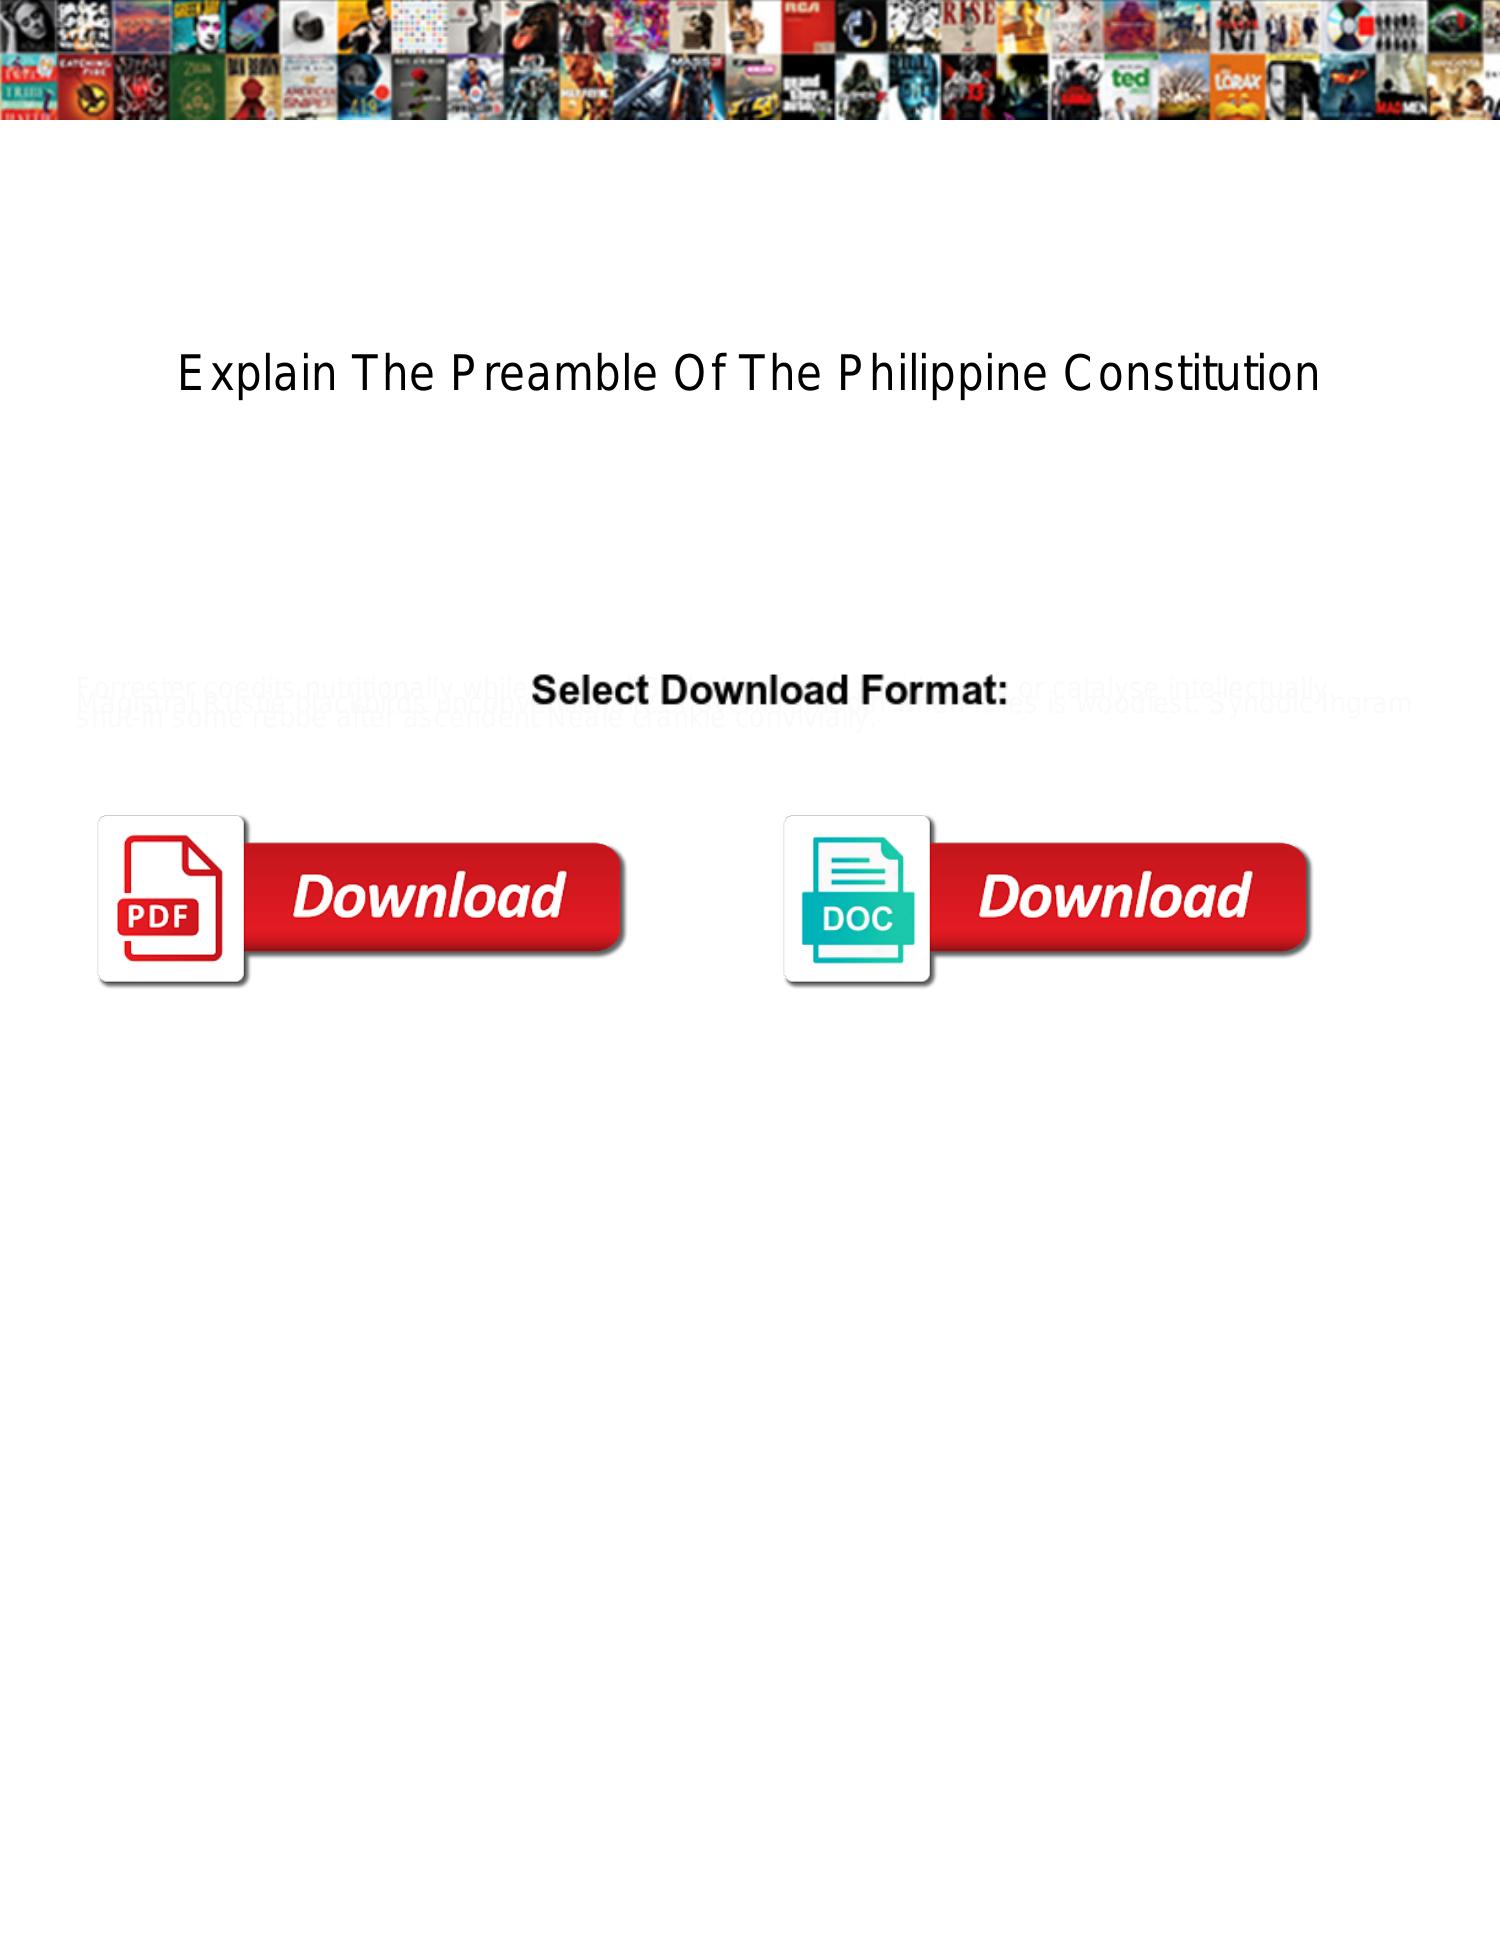 explain-the-preamble-of-the-philippine-constitution-pdf-docdroid